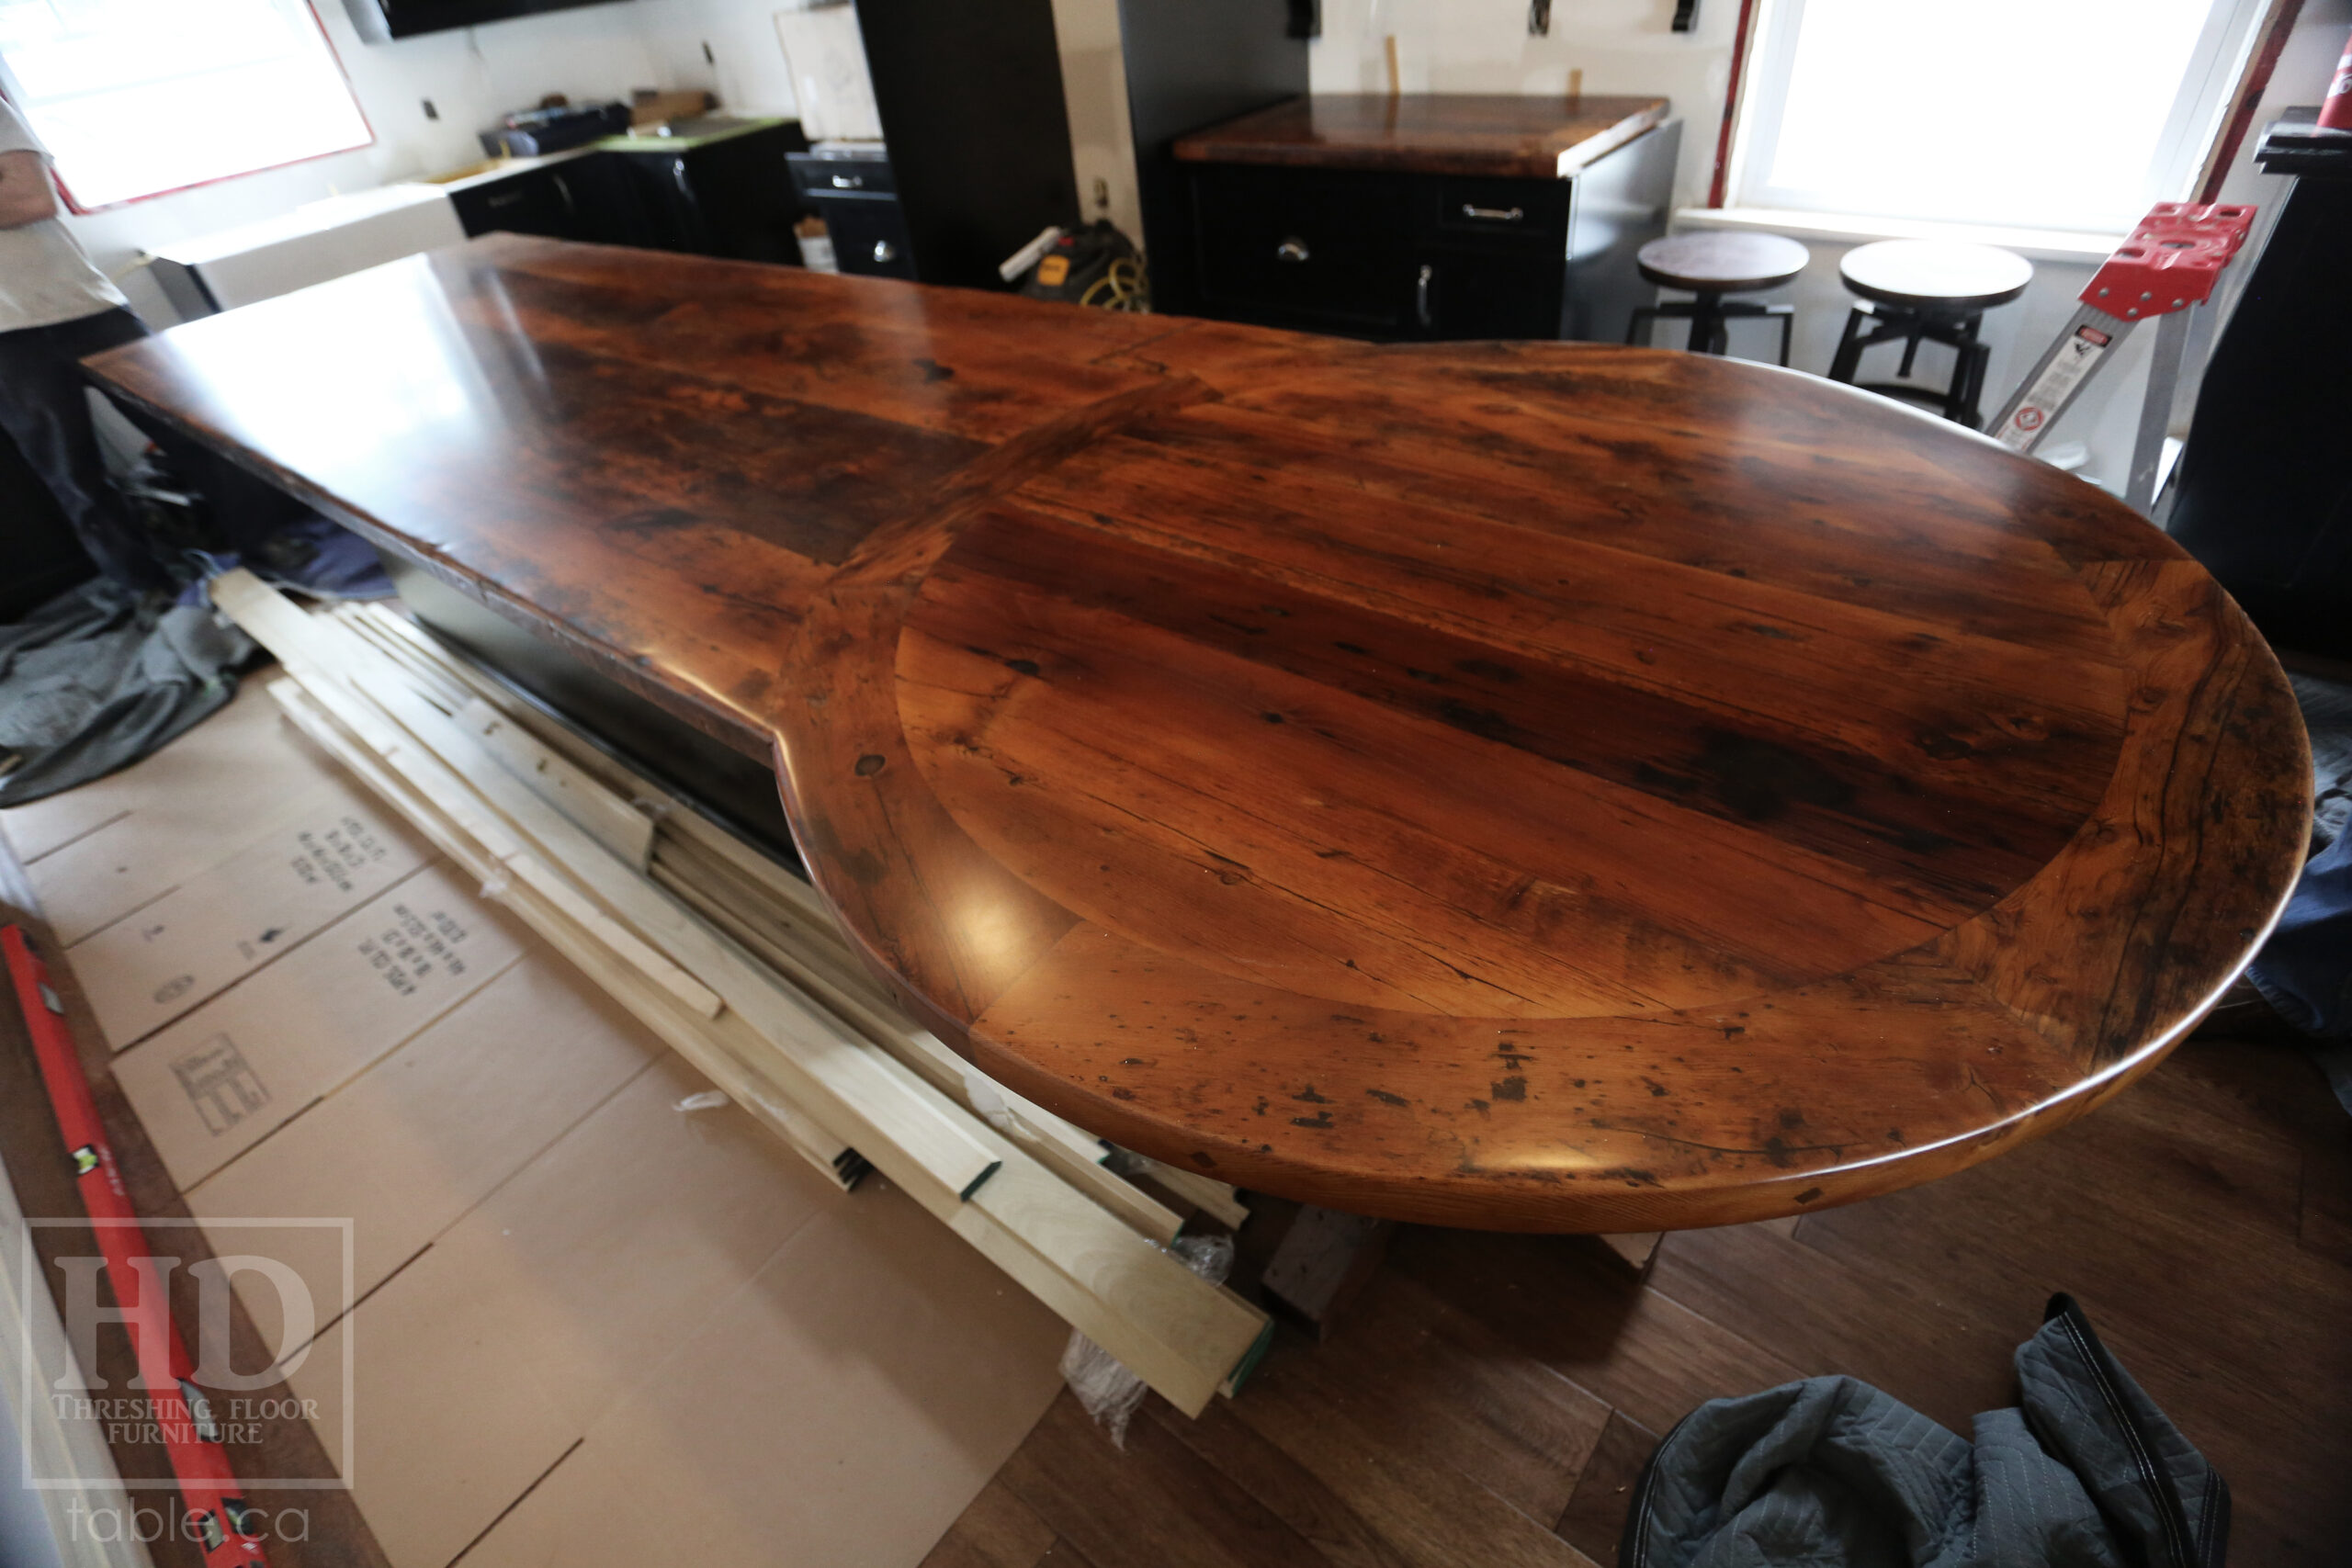 Ontario Barnwood Island Top + Post we made for a Fort Erie, Ontario home - Hand-Hewn Post Pedestal at End [to extend island size] - Reclaimed Hemlock Threshing Floor Construction - Original edges & distressing maintained - Premium epoxy + satin polyurethane finish - www.table.ca